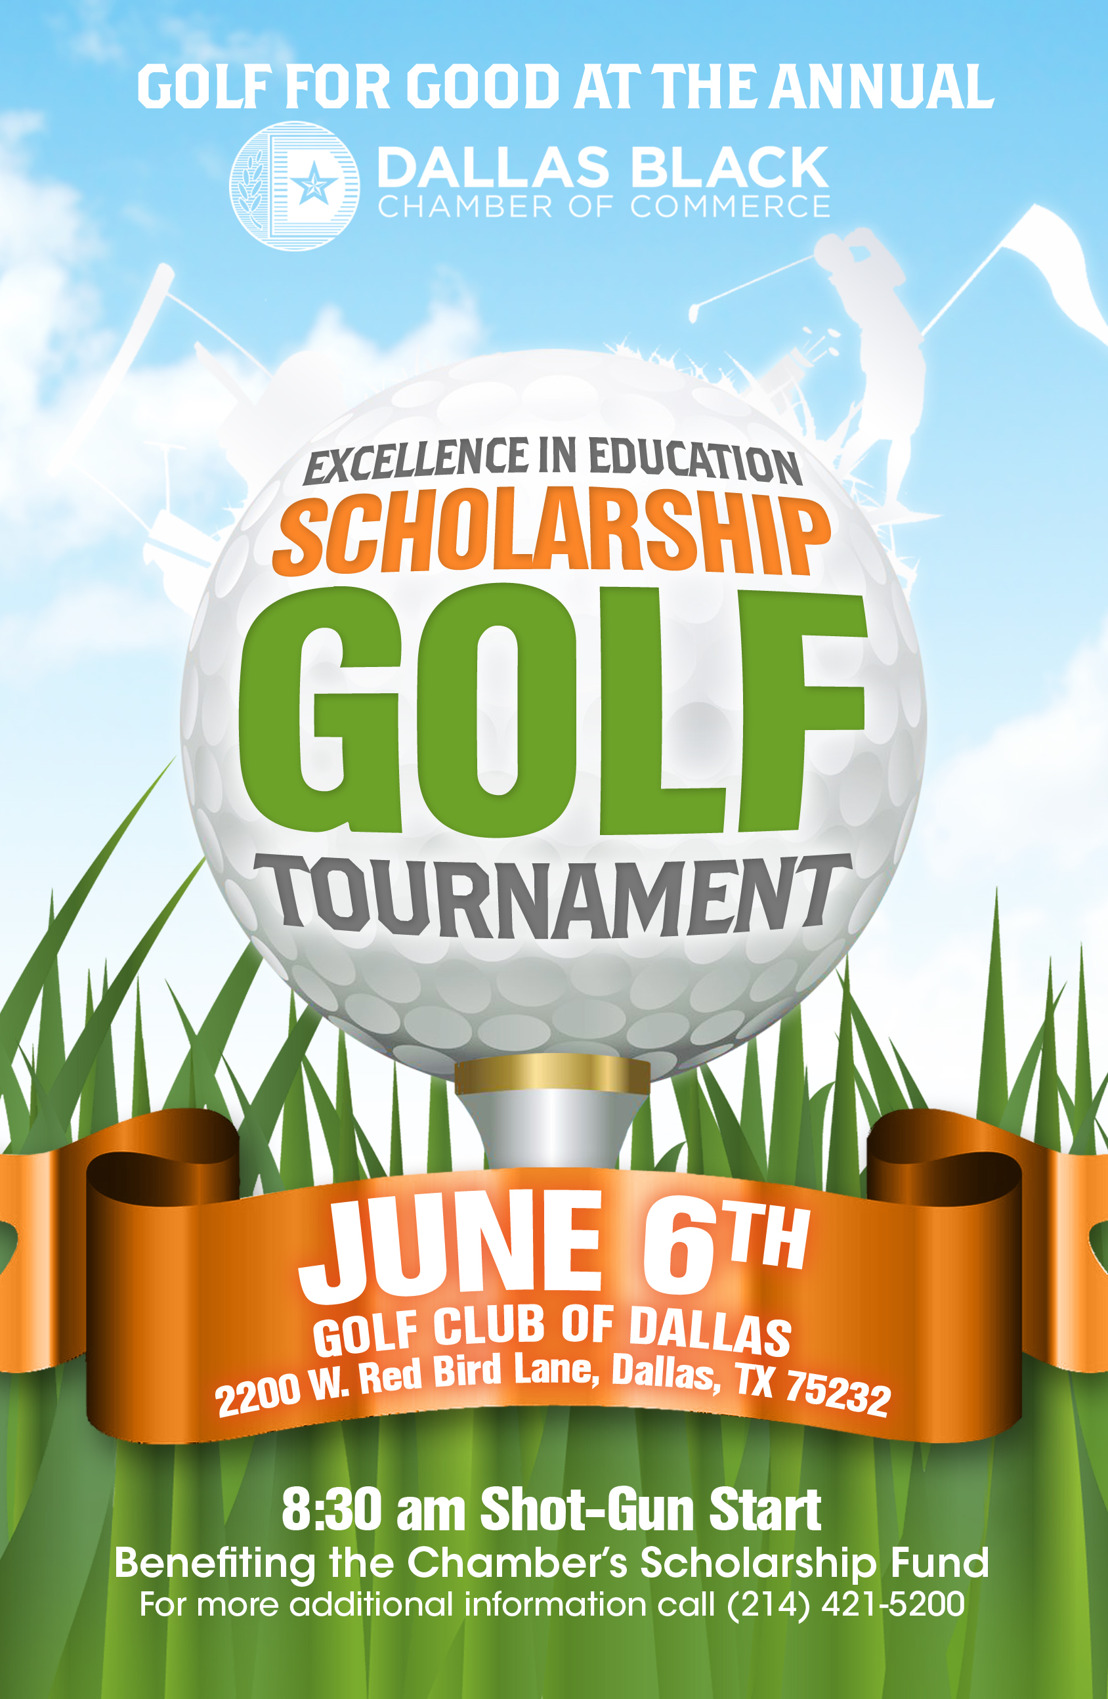 Dallas Black Chamber of Commerce Excellence in Education Scholarship Golf Tournament